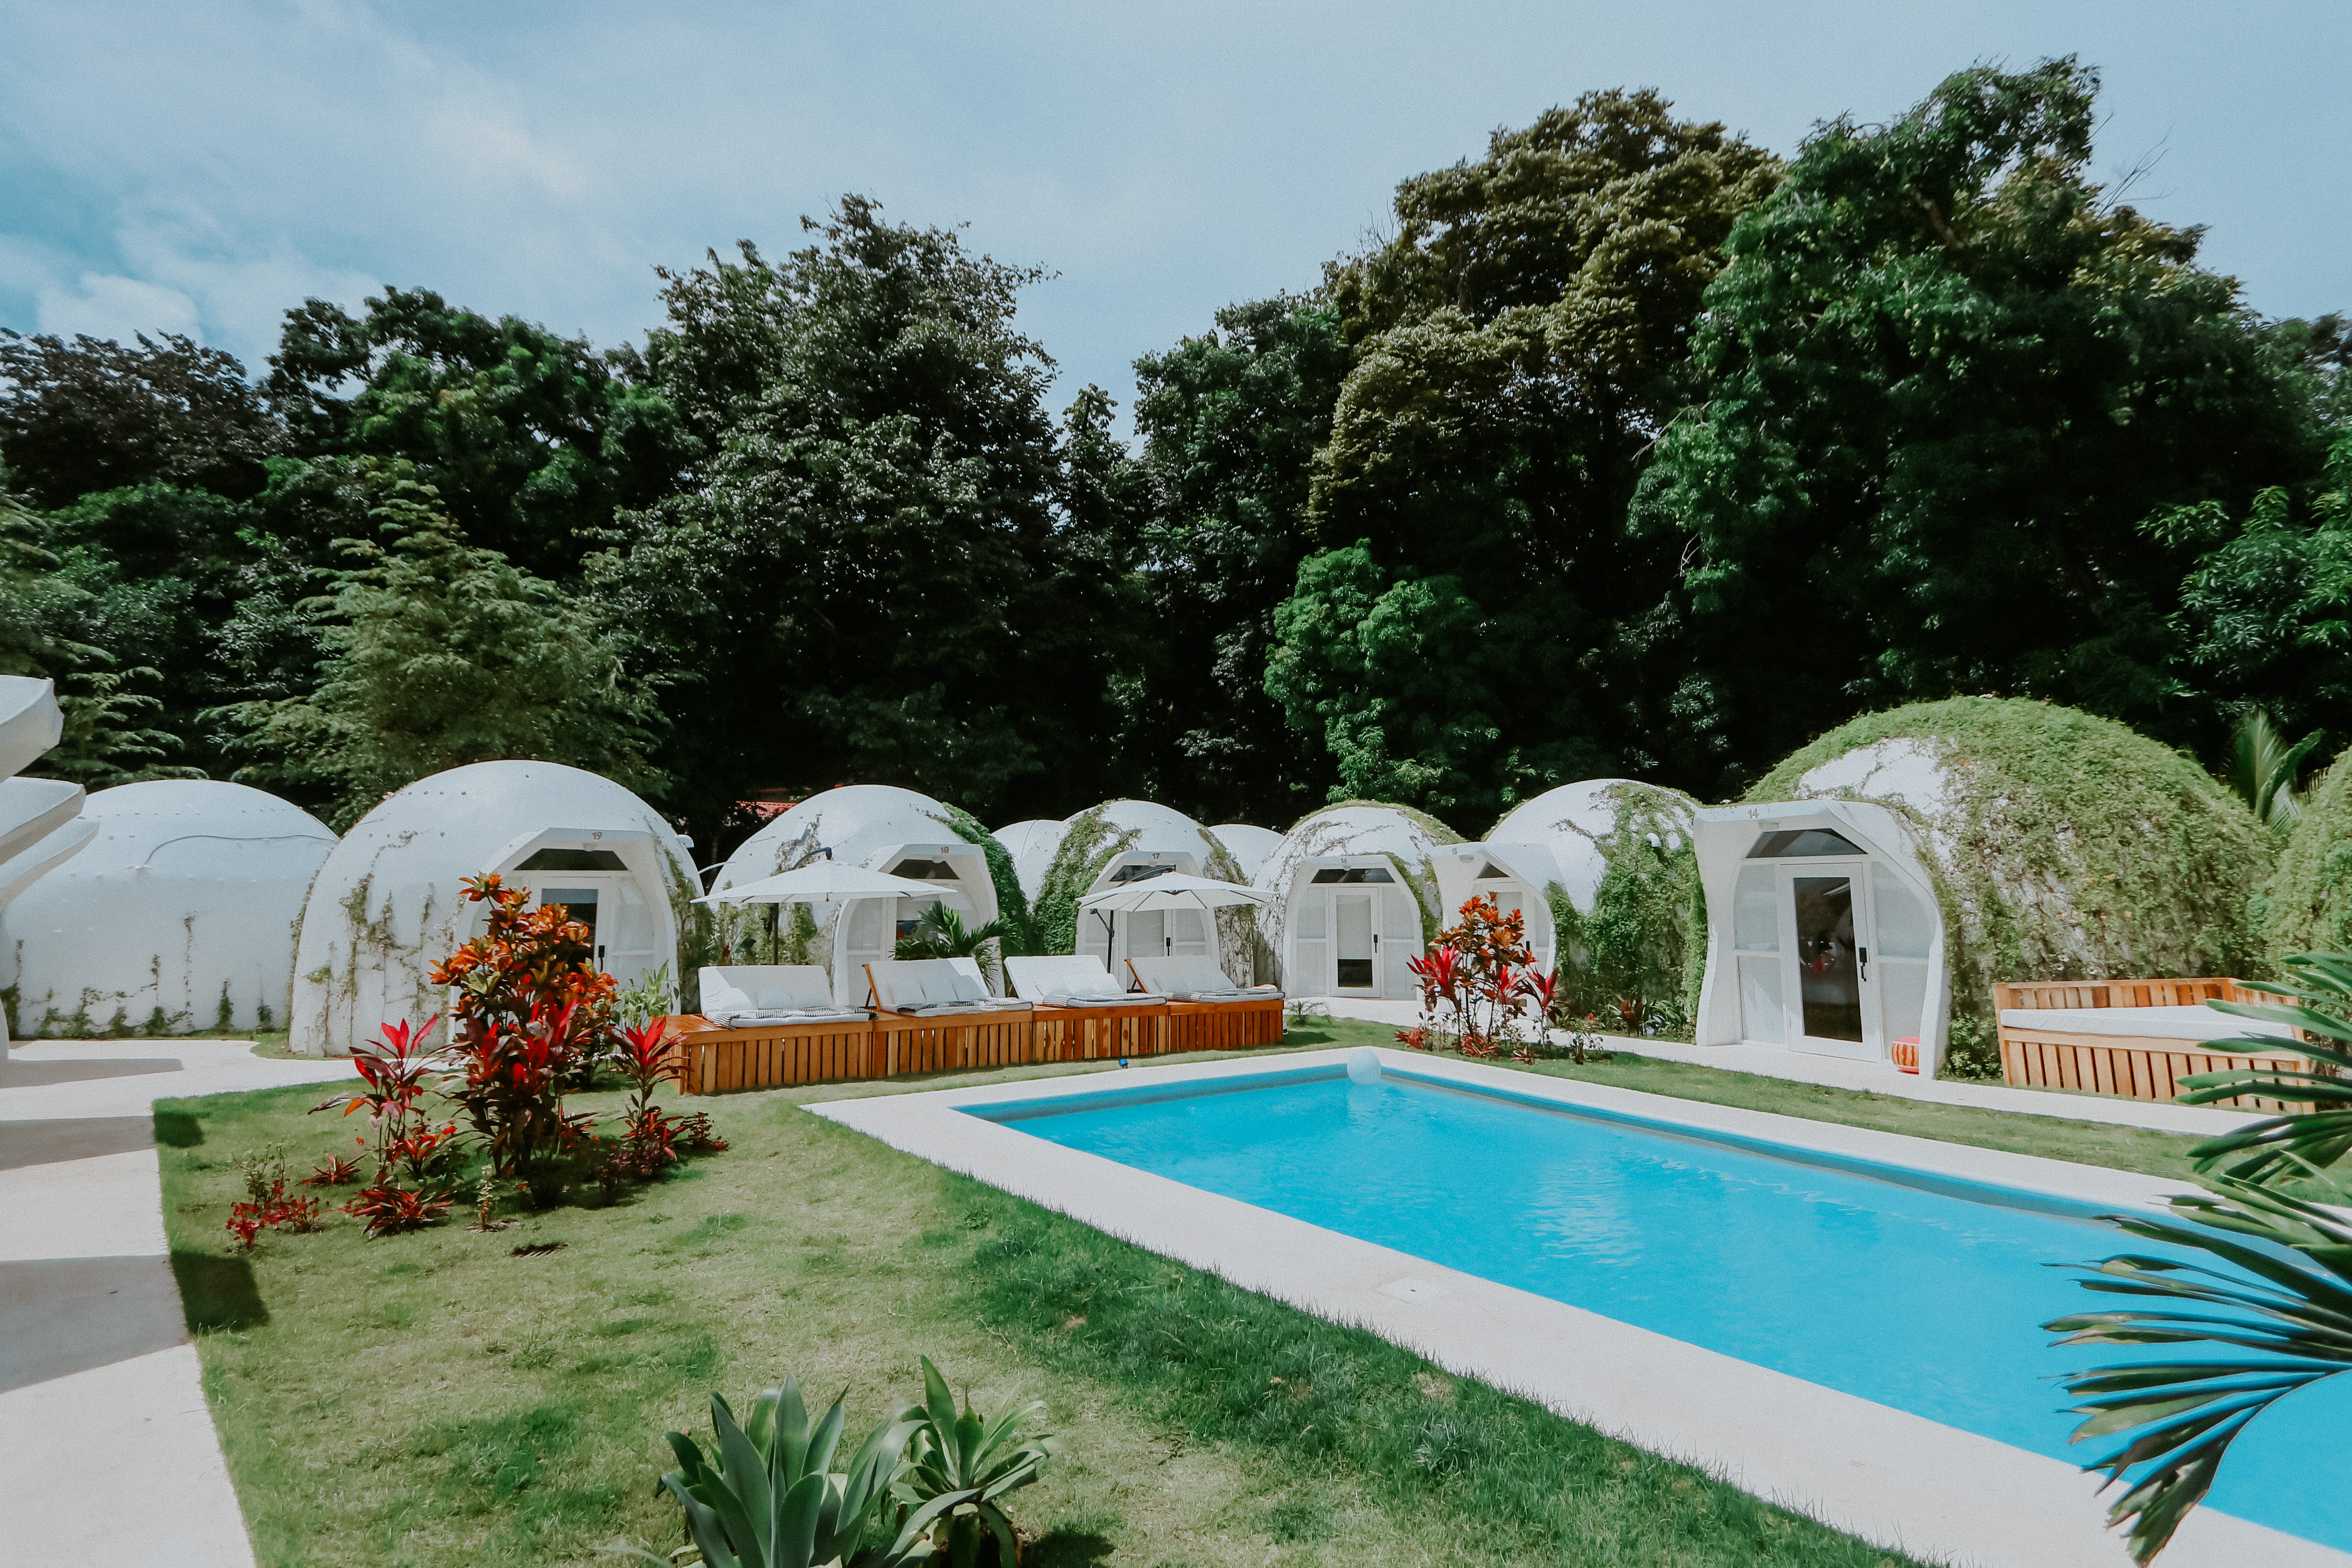 Costa Rica's Igloo Beach Lodge Is a Unique Vacation Spot